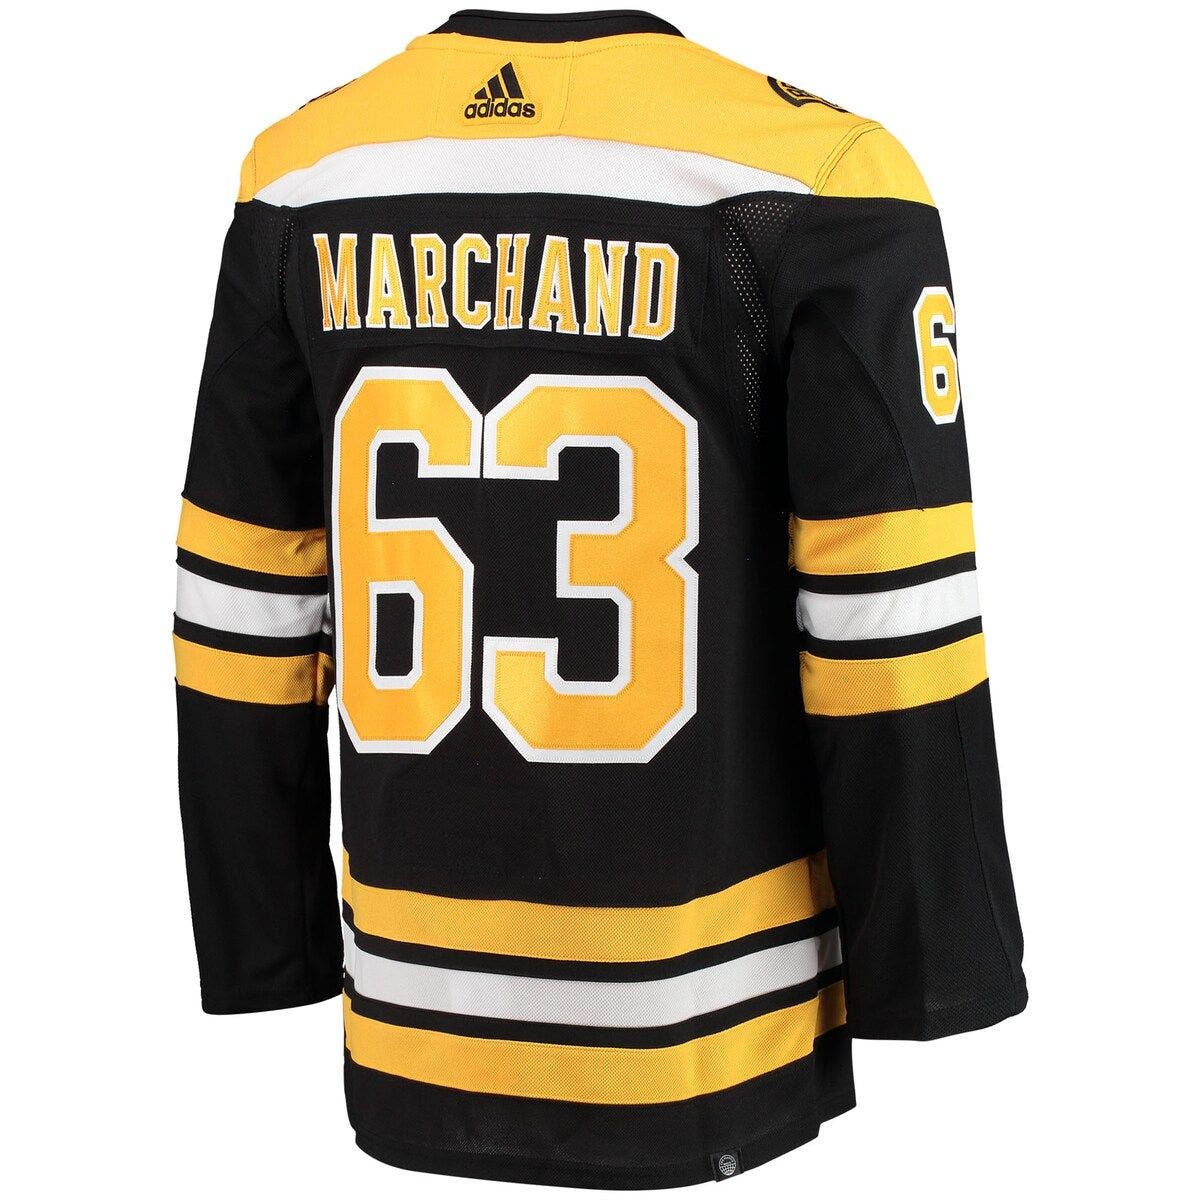 marchand retro jersey